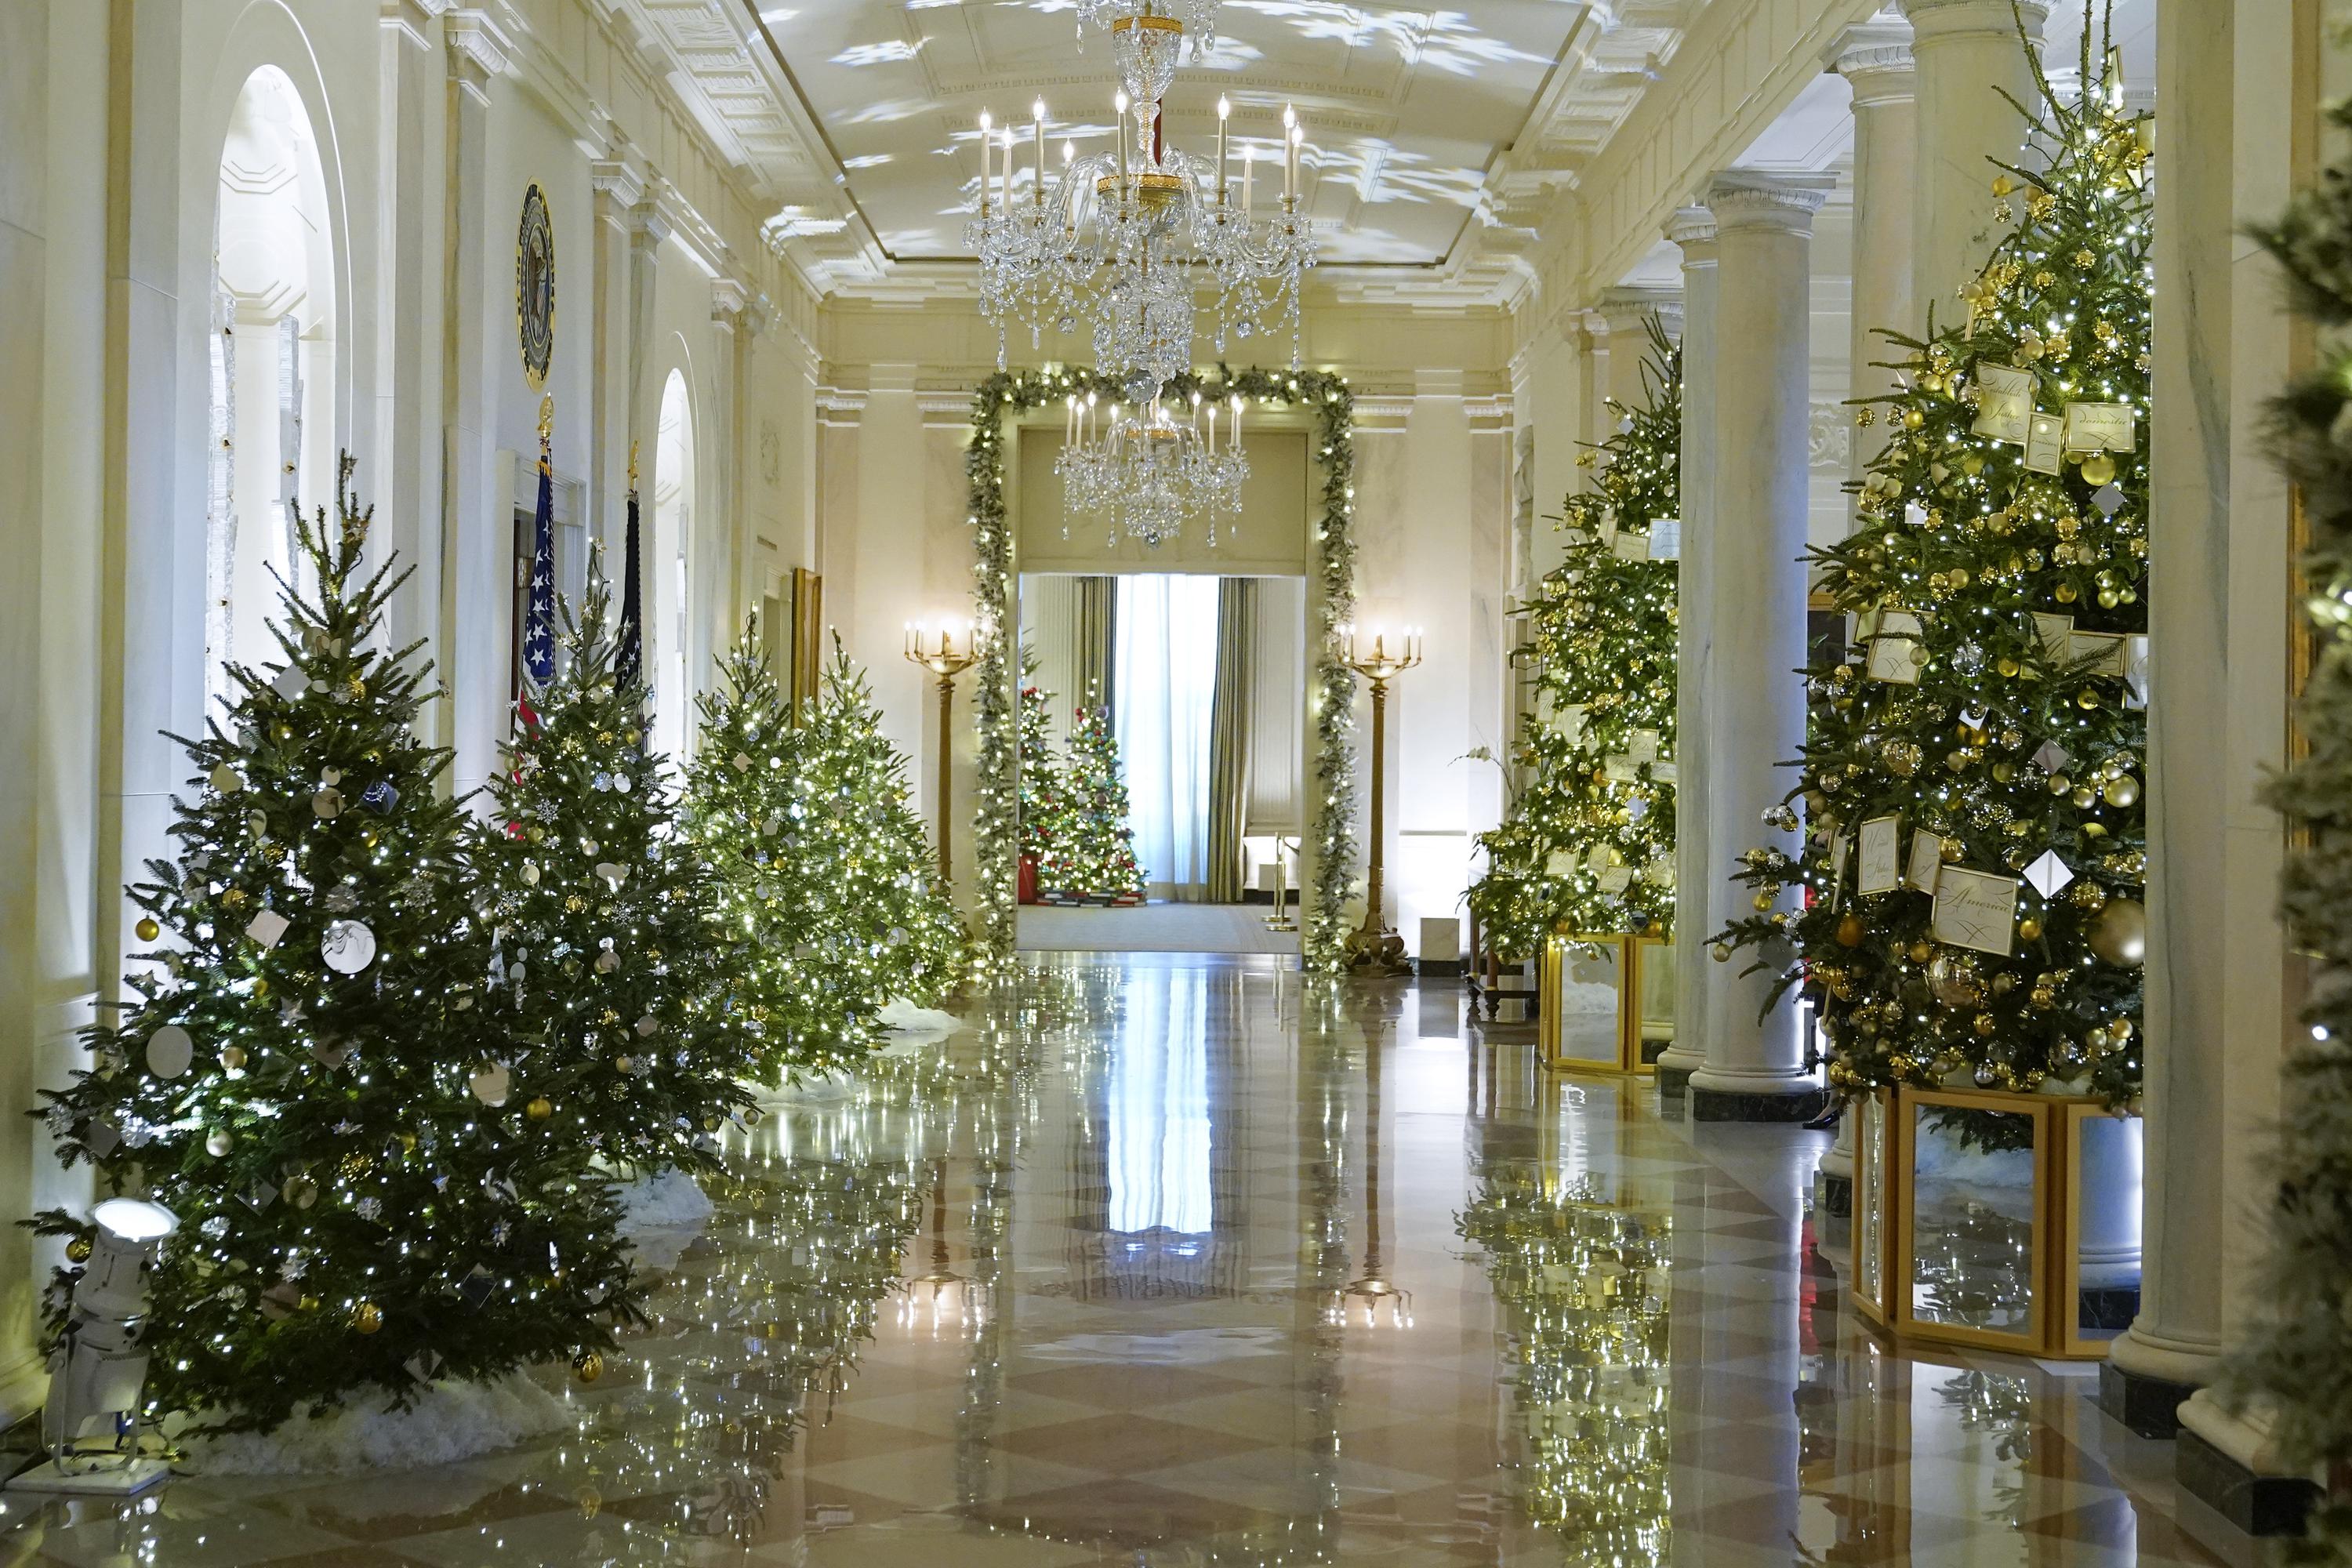 White House unveils its holiday decor, including 77 trees and a 'We the  People' theme